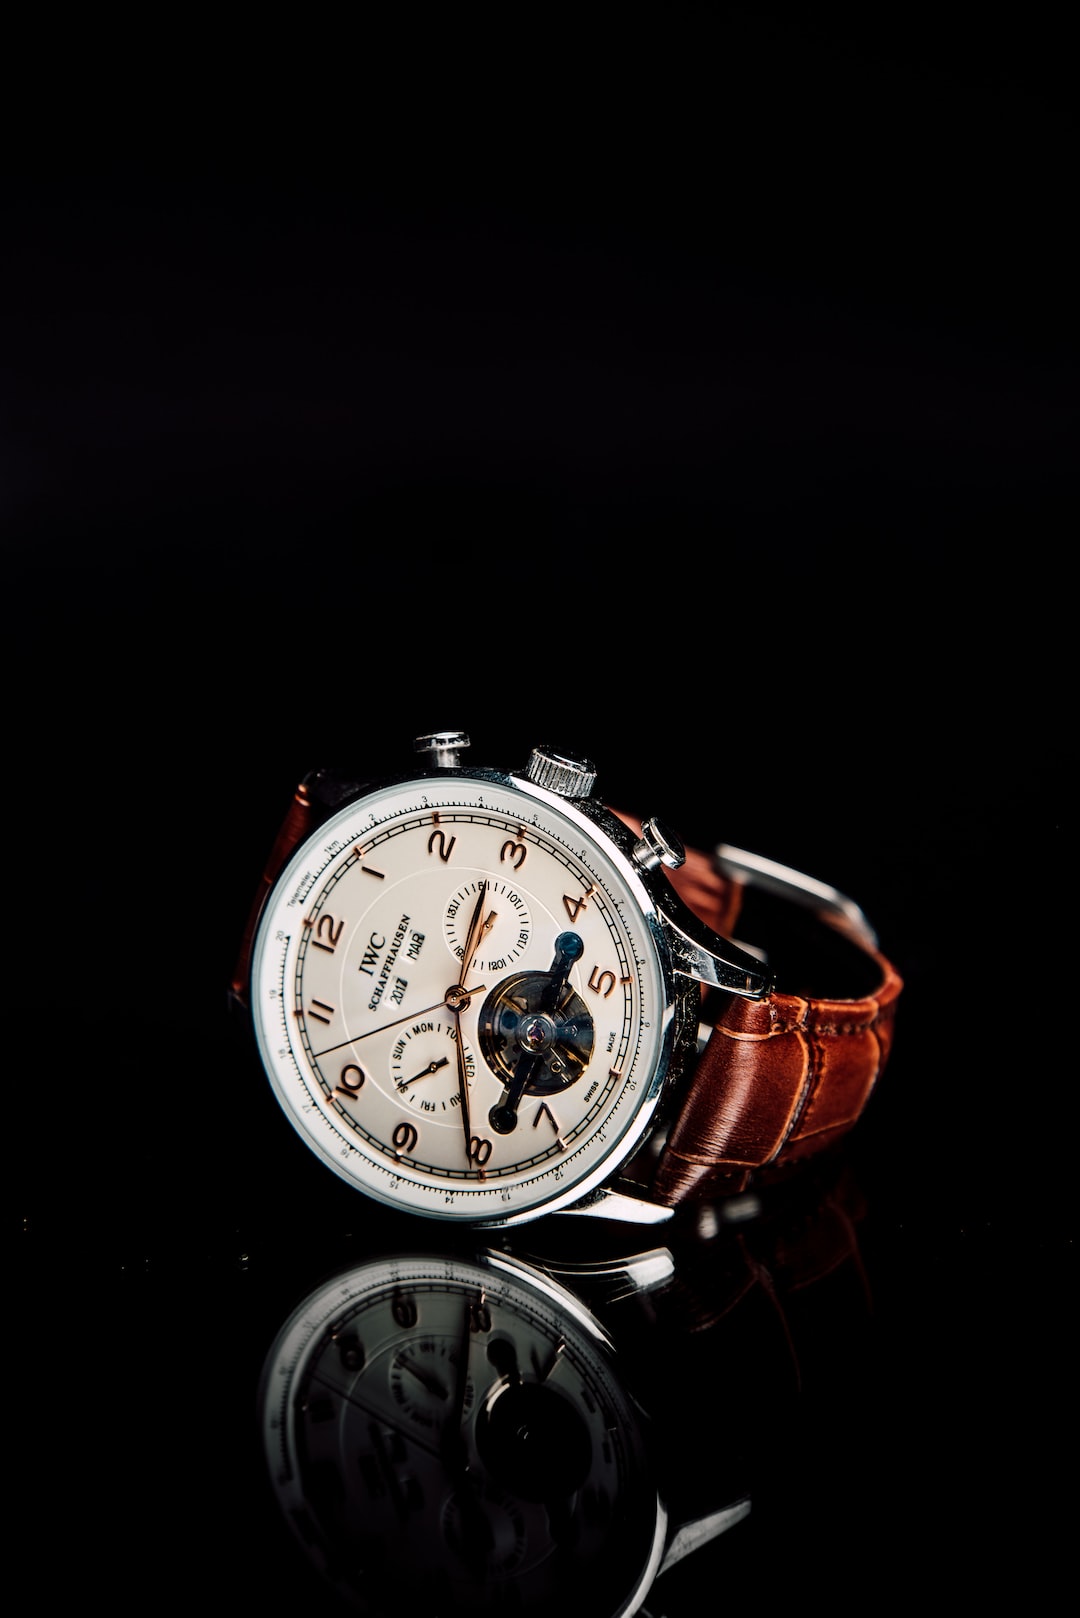 Taken for a university project, this beautiful timepiece sat so nicely on the mirror, it just reeks of elegance & sophistication.